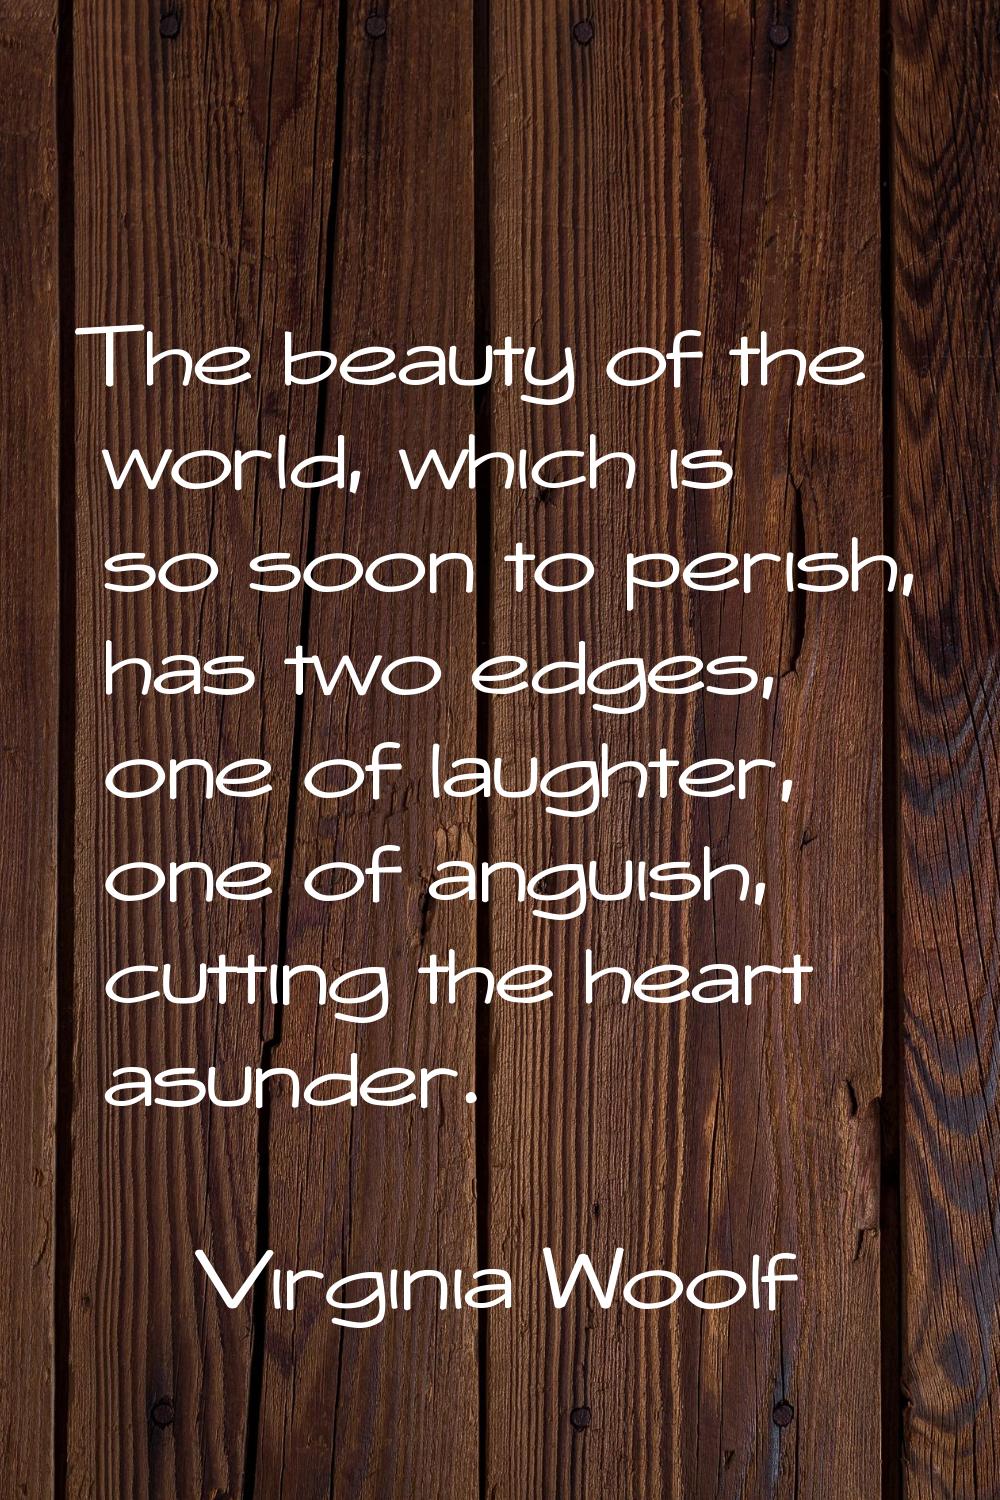 The beauty of the world, which is so soon to perish, has two edges, one of laughter, one of anguish